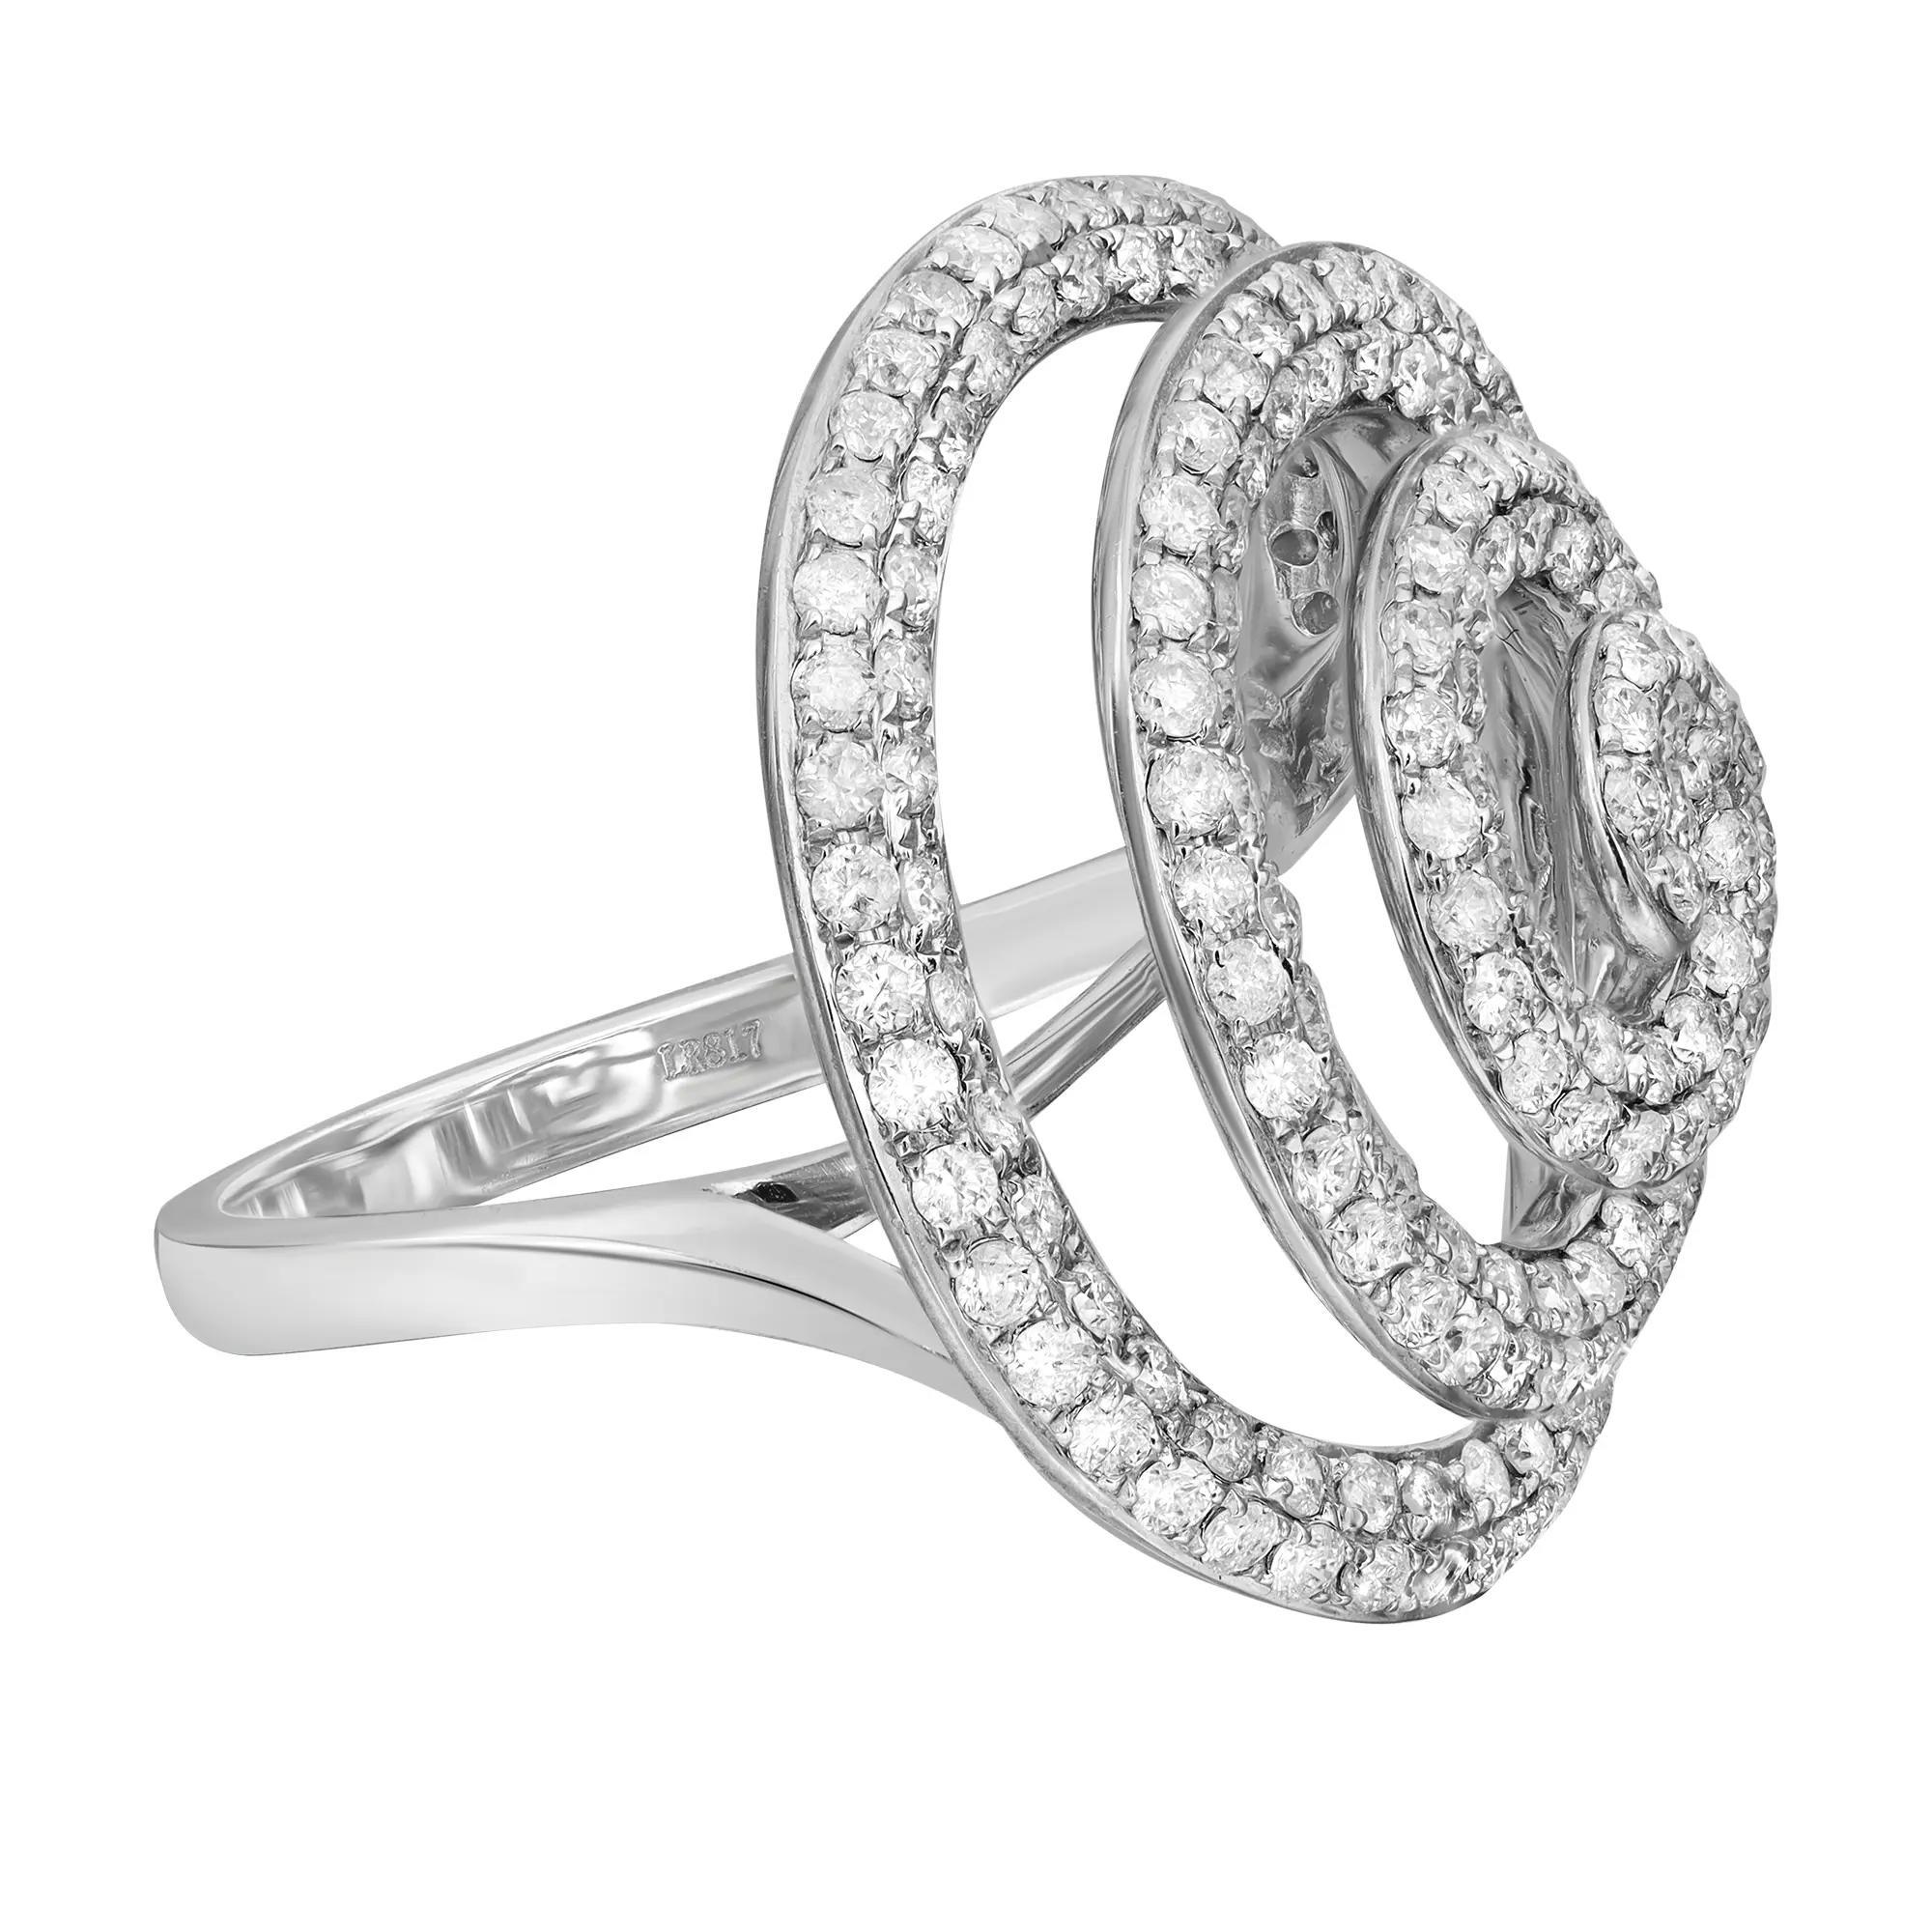 This bold and beautiful cocktail ring features pave set round cut diamonds weighing 1.88 carats set in a spiral formation. Crafted in 14k white gold, this ring exudes understated style and elegance. Diamond color I and SI1 clarity. Ring size 7.5.